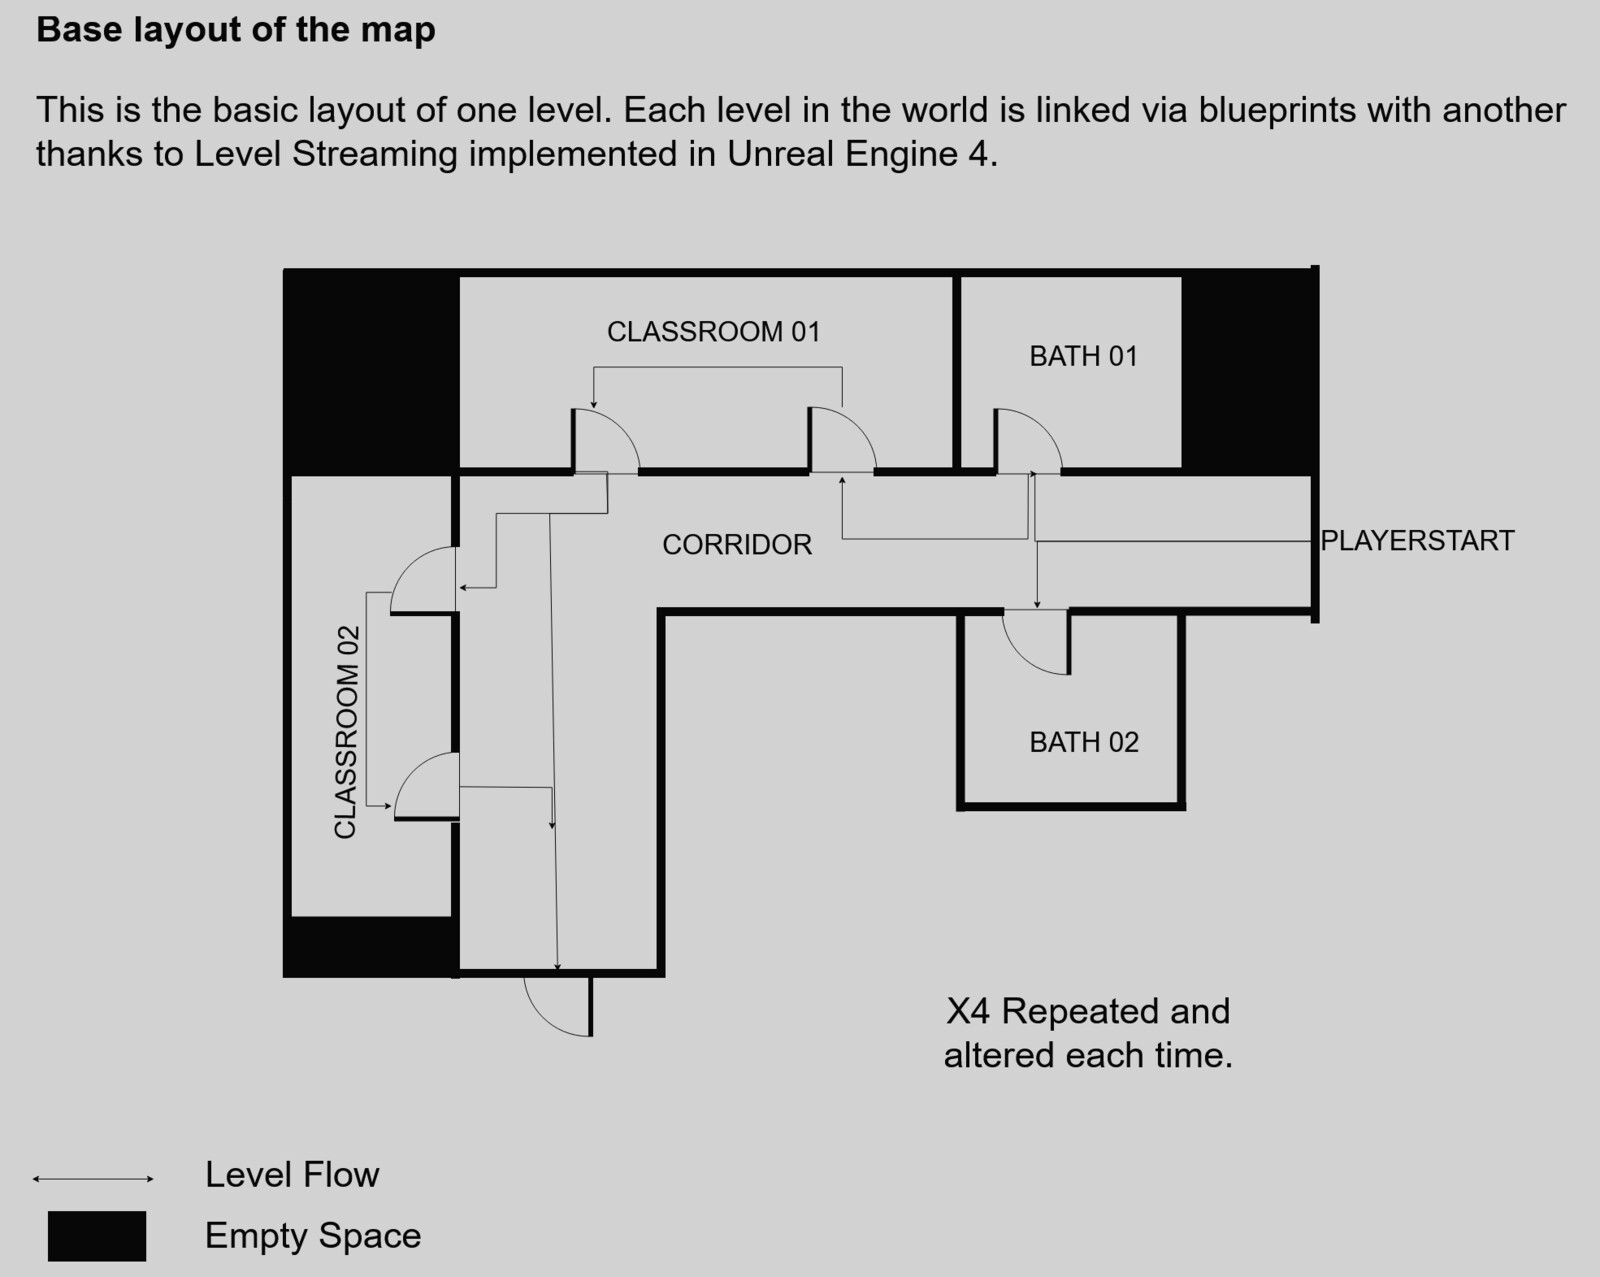 Layout of one single level. Consider the fact that this is looped 4 times in the map. The levels are loaded and unloaded with Level Streaming practices in Unreal.